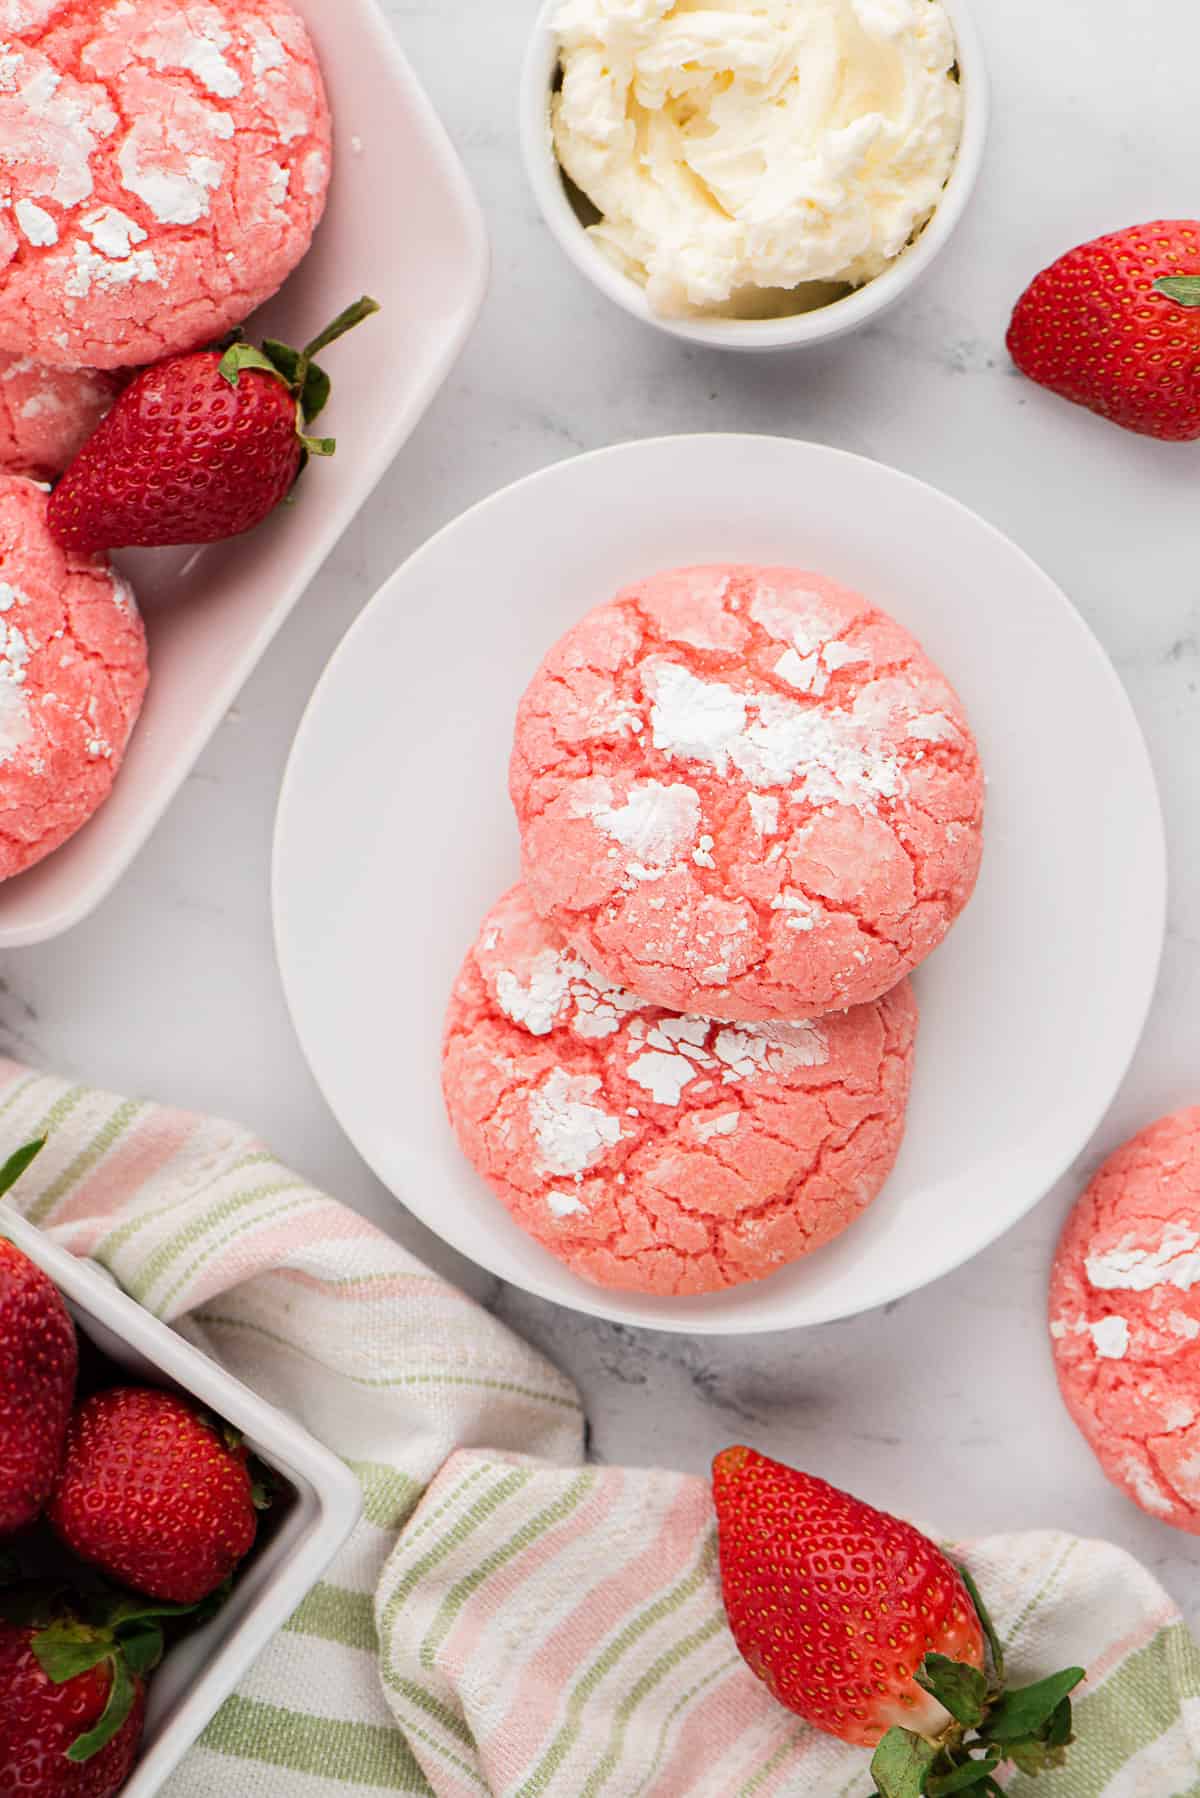 Strawberry cake mix cookies next to strawberries and cream cheese filling.